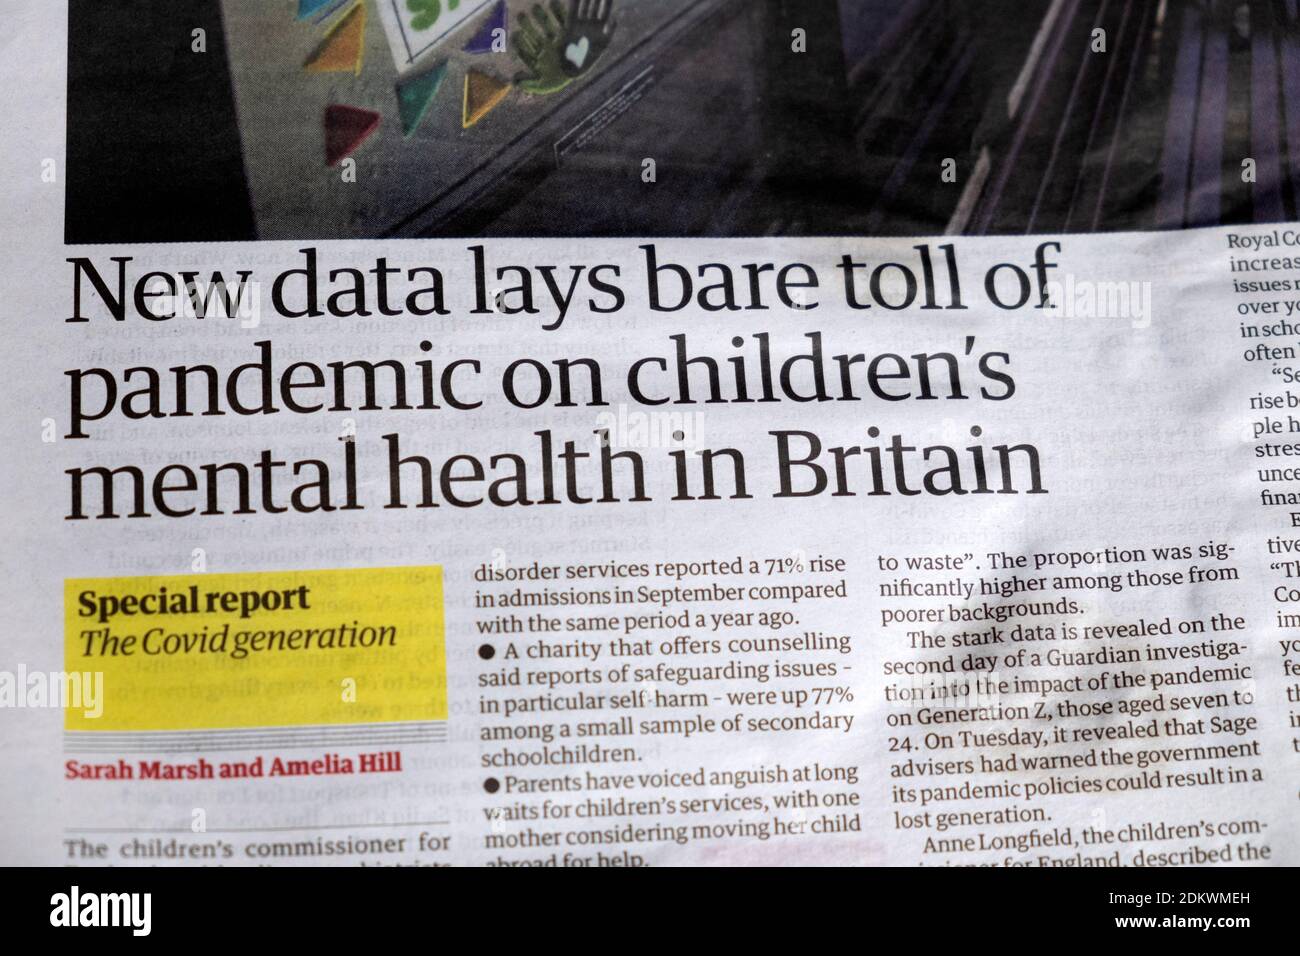 New Data Lays Bare Toll Of Pandemic On Children S Mental Health In Britain Guardian Newspaper Headline Inside Page Article 21 October London Uk Stock Photo Alamy